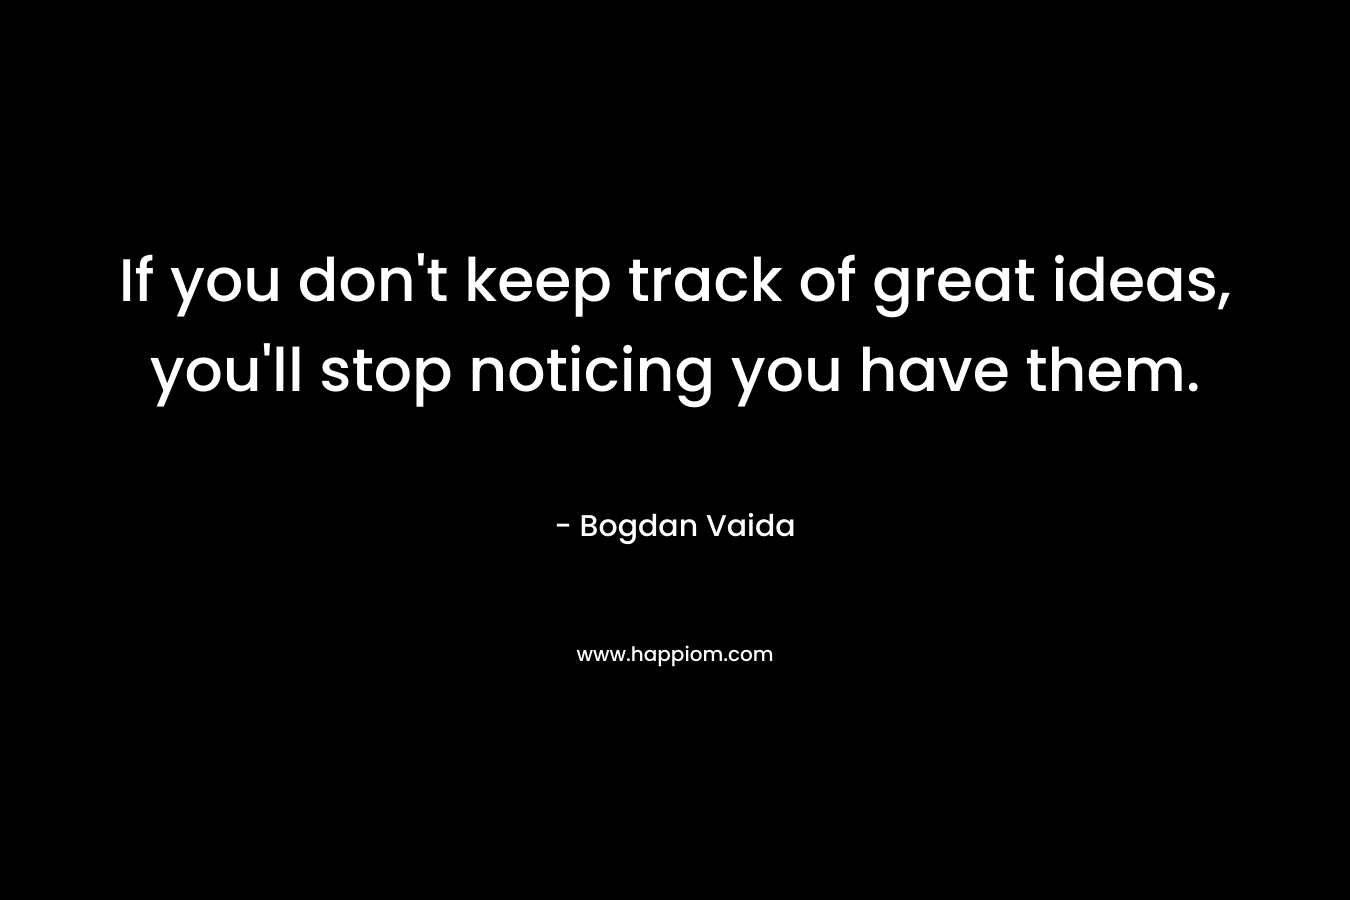 If you don't keep track of great ideas, you'll stop noticing you have them.